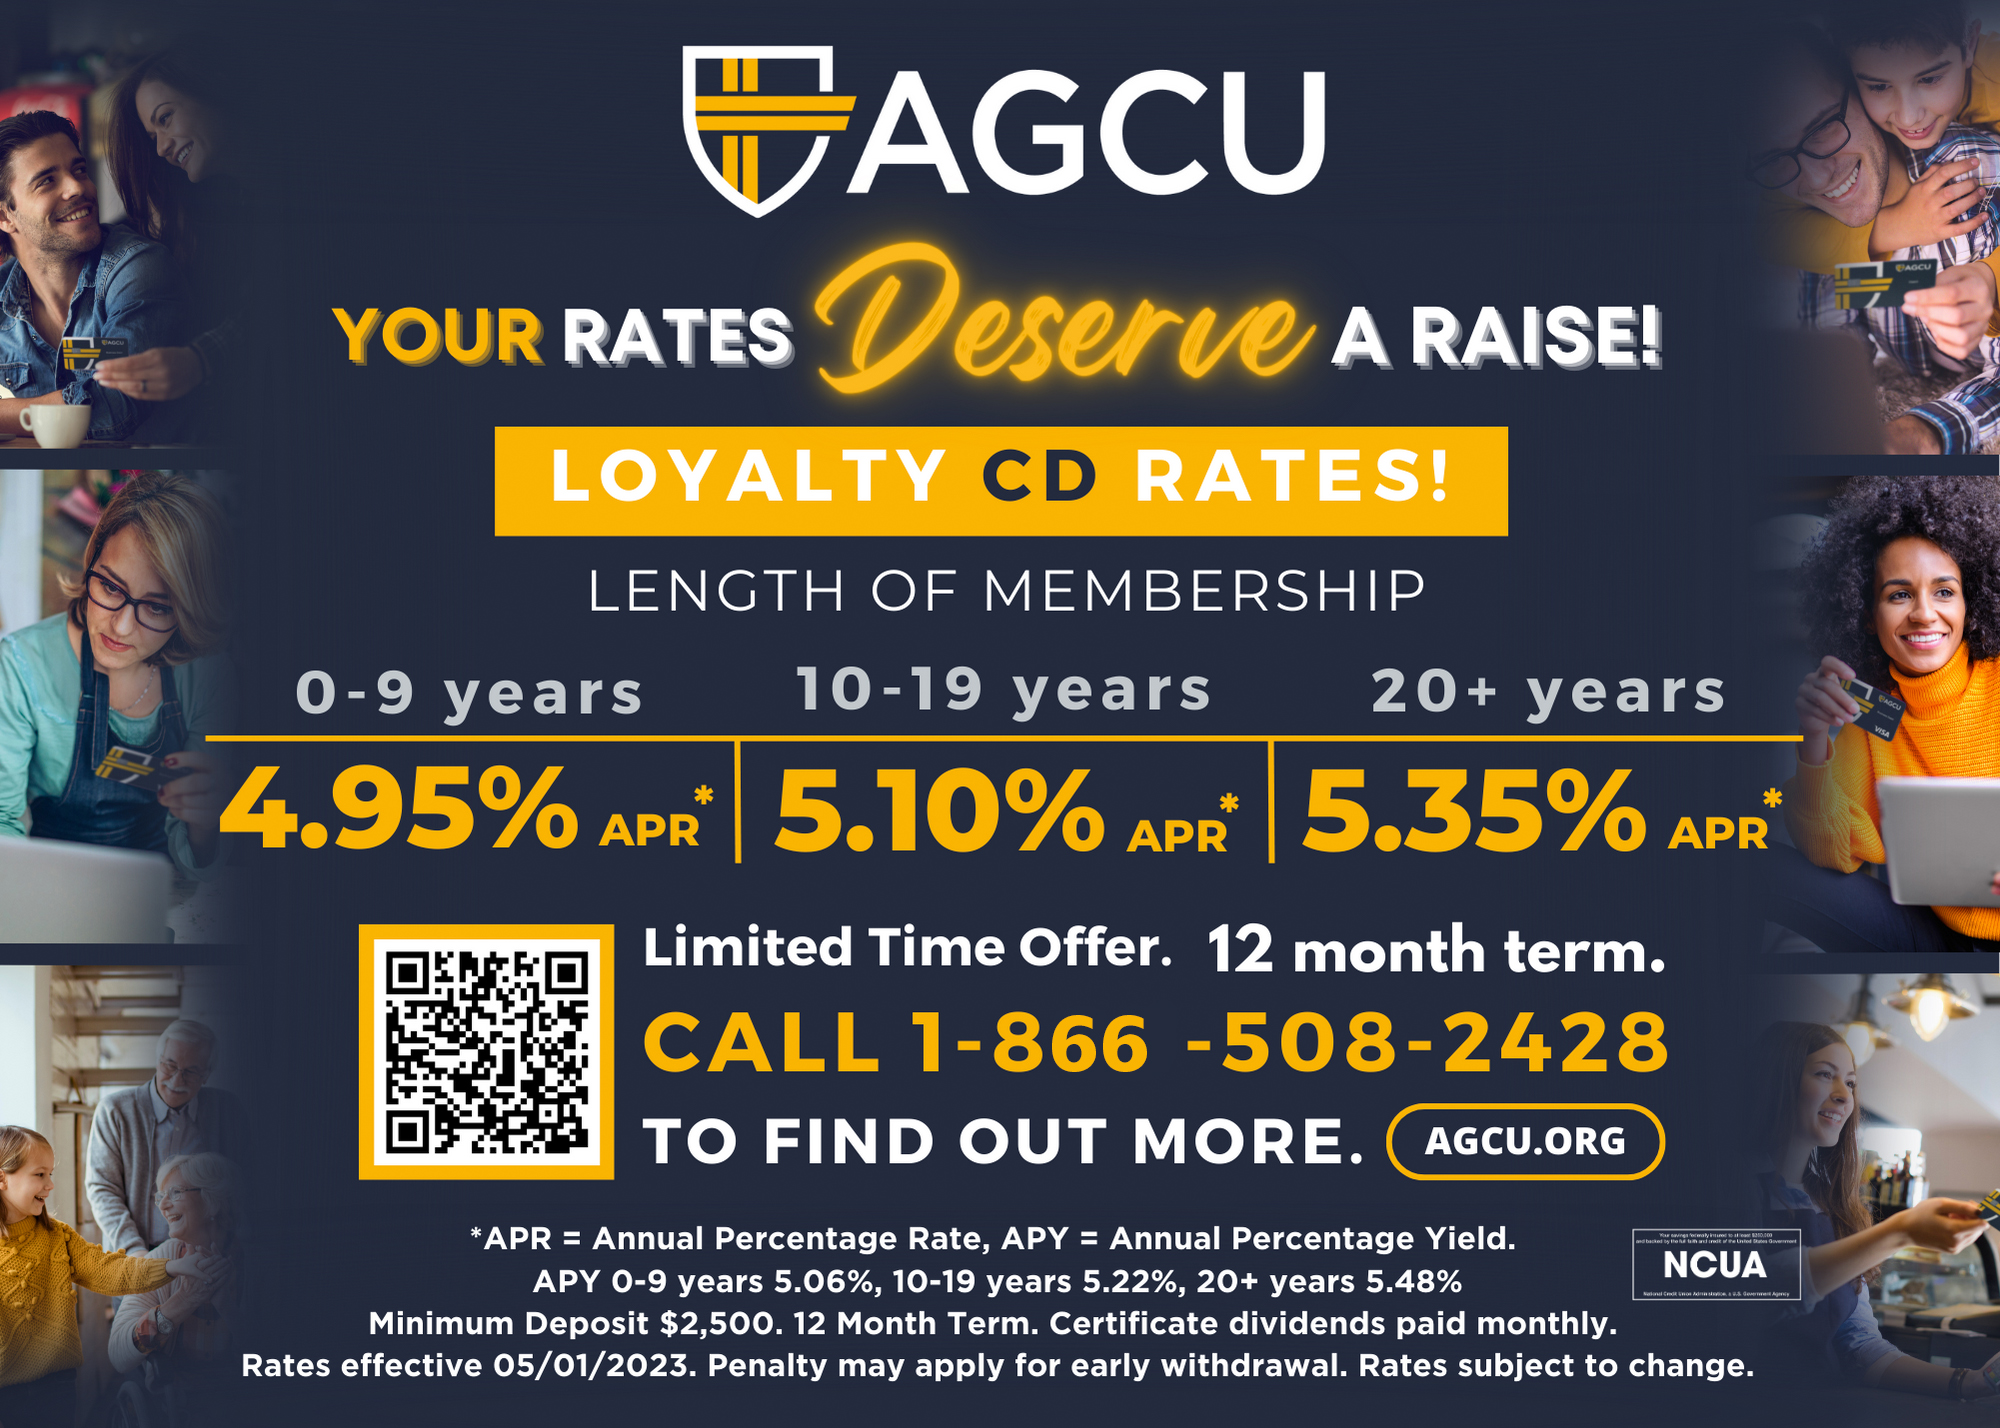 Your Rates Deserve a raise! Loyalty CD Rates based on length of membership